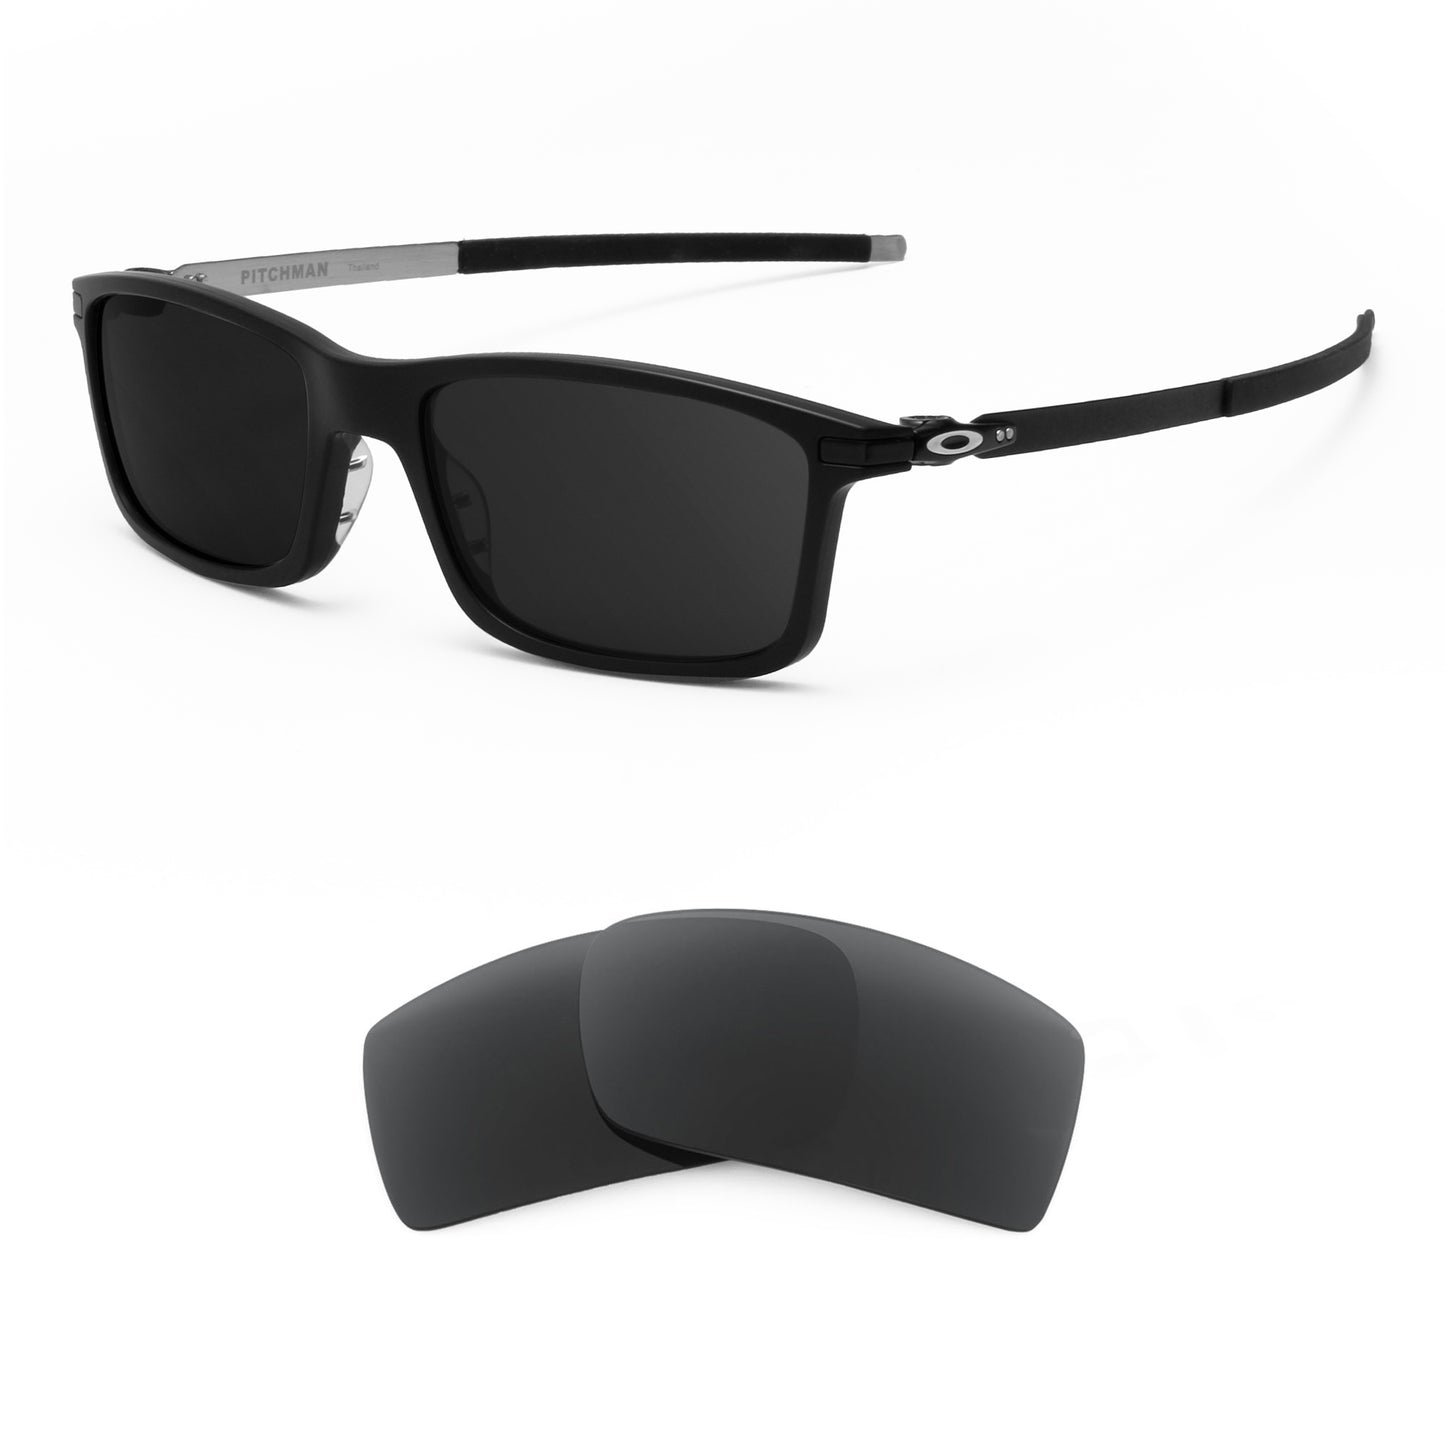 Oakley Pitchman Rx 55 sunglasses with replacement lenses